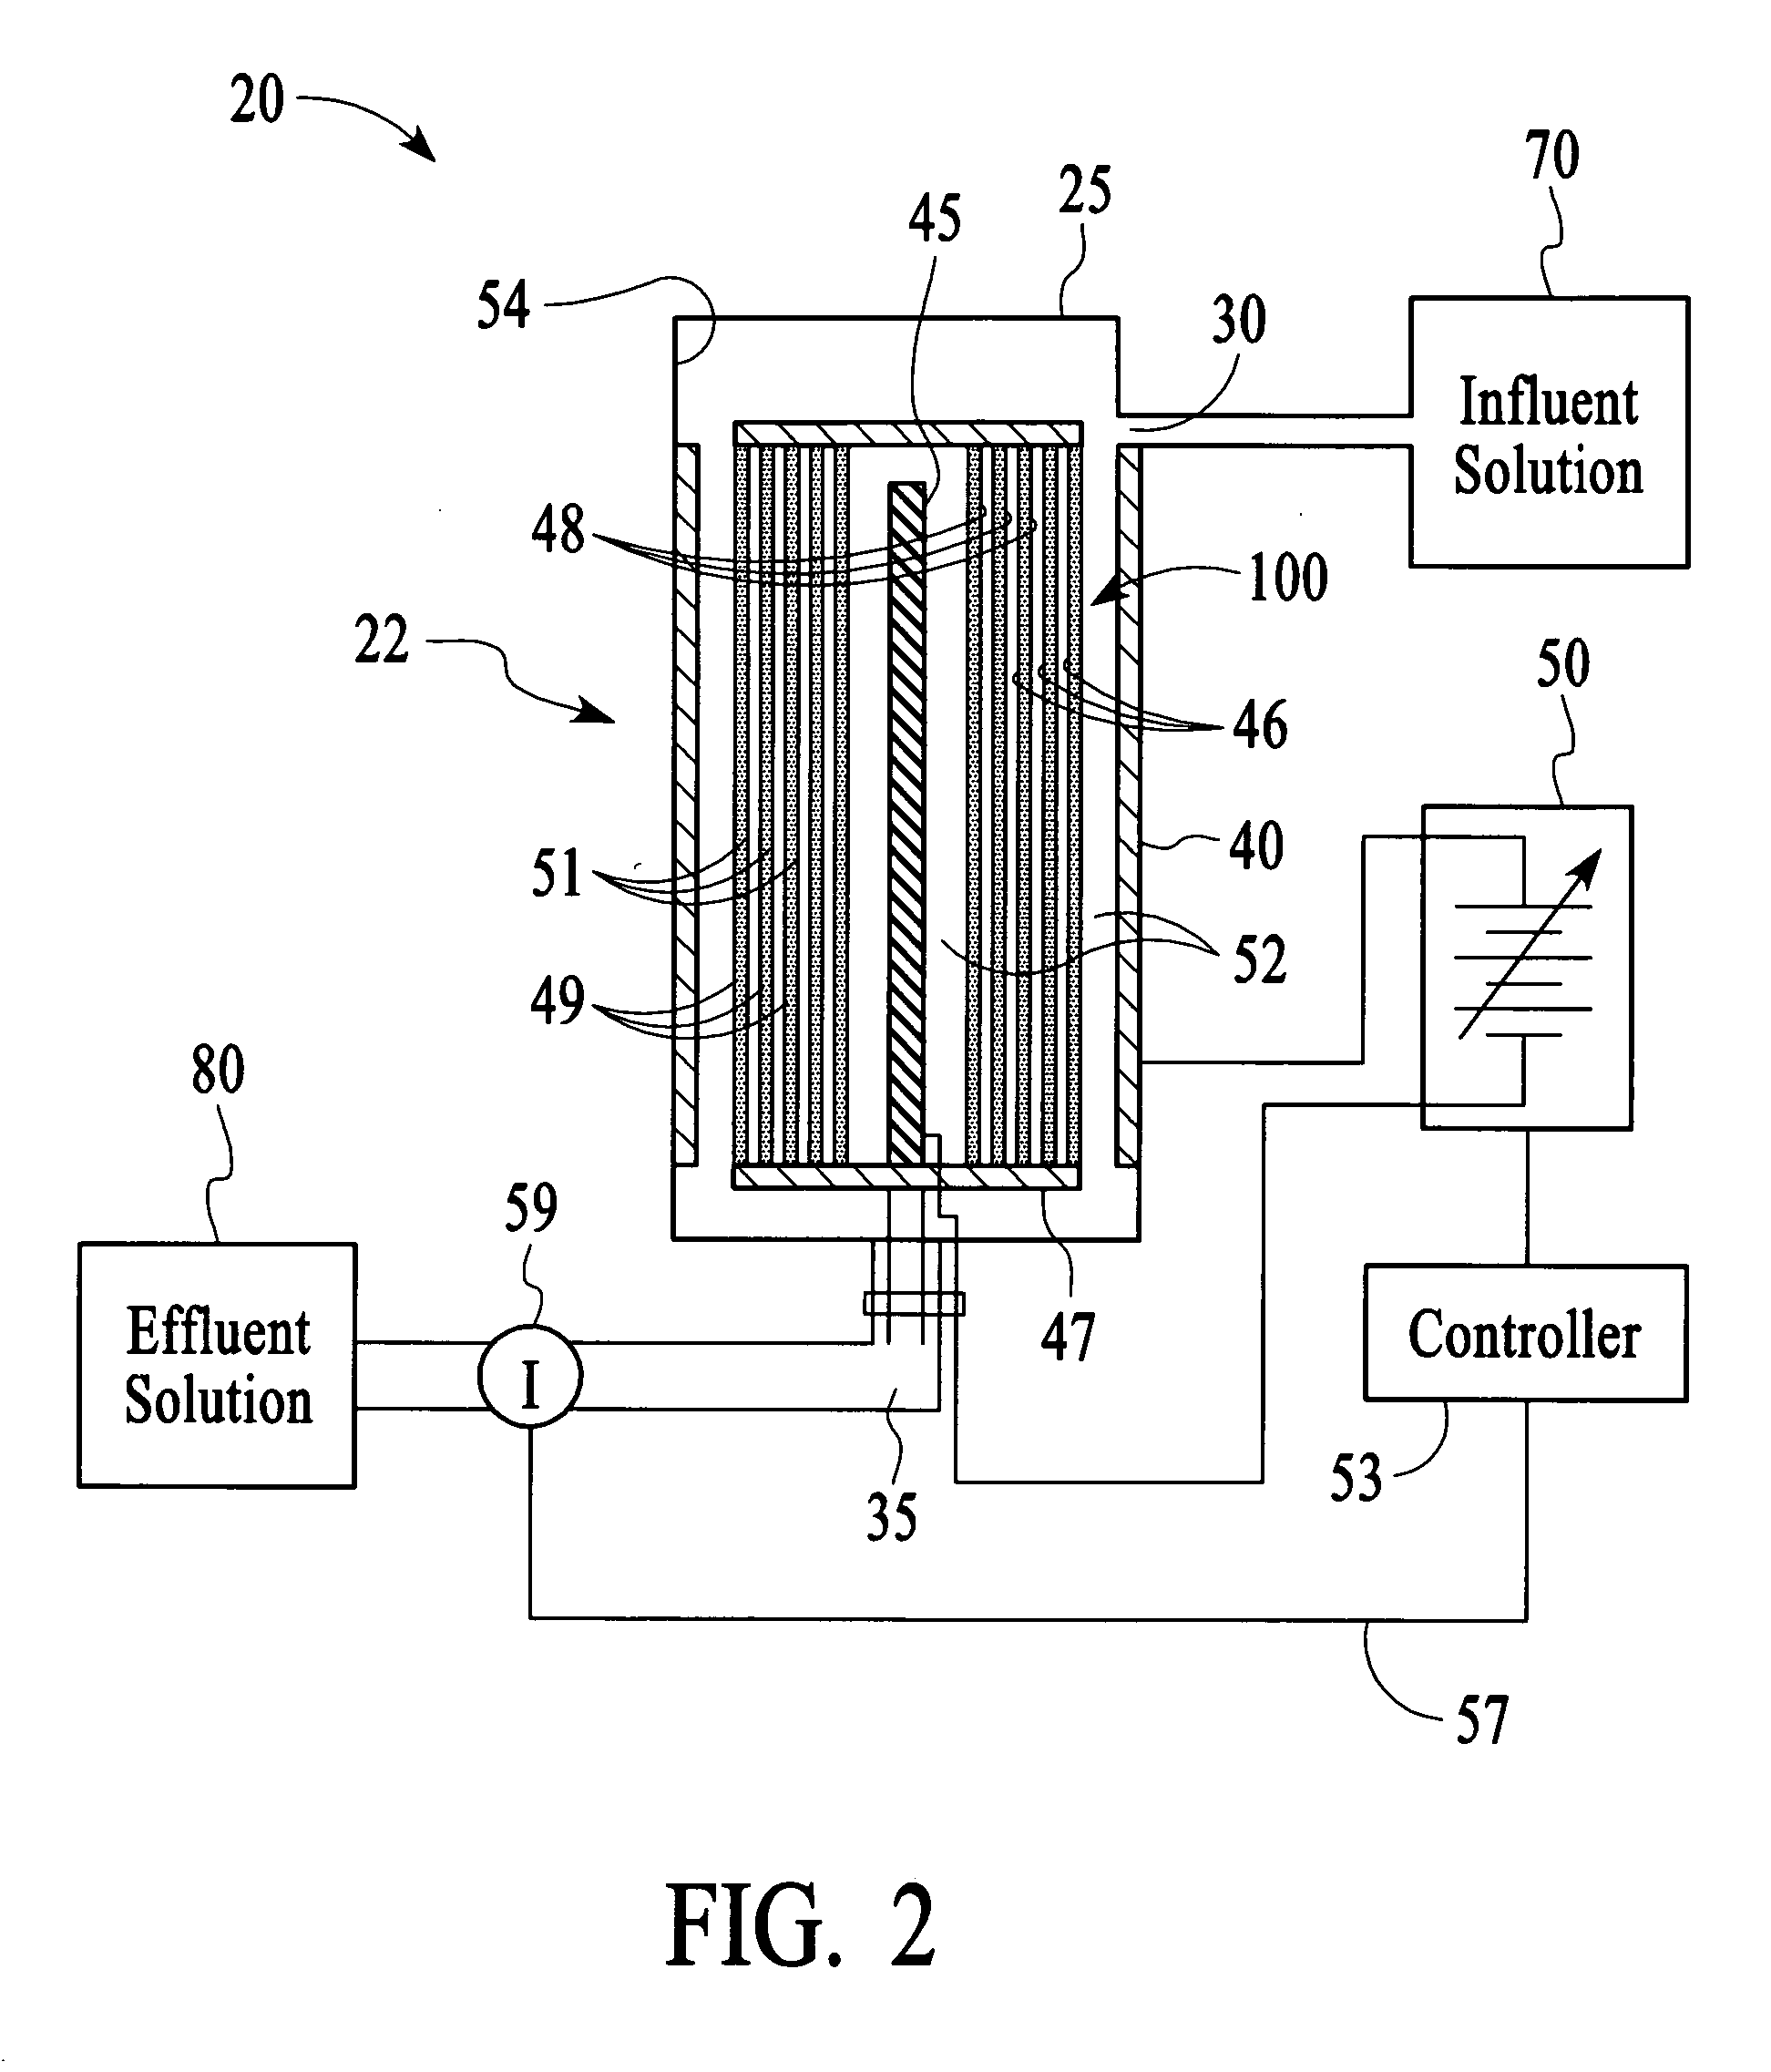 Selectable ion concentrations with electrolytic ion exchange